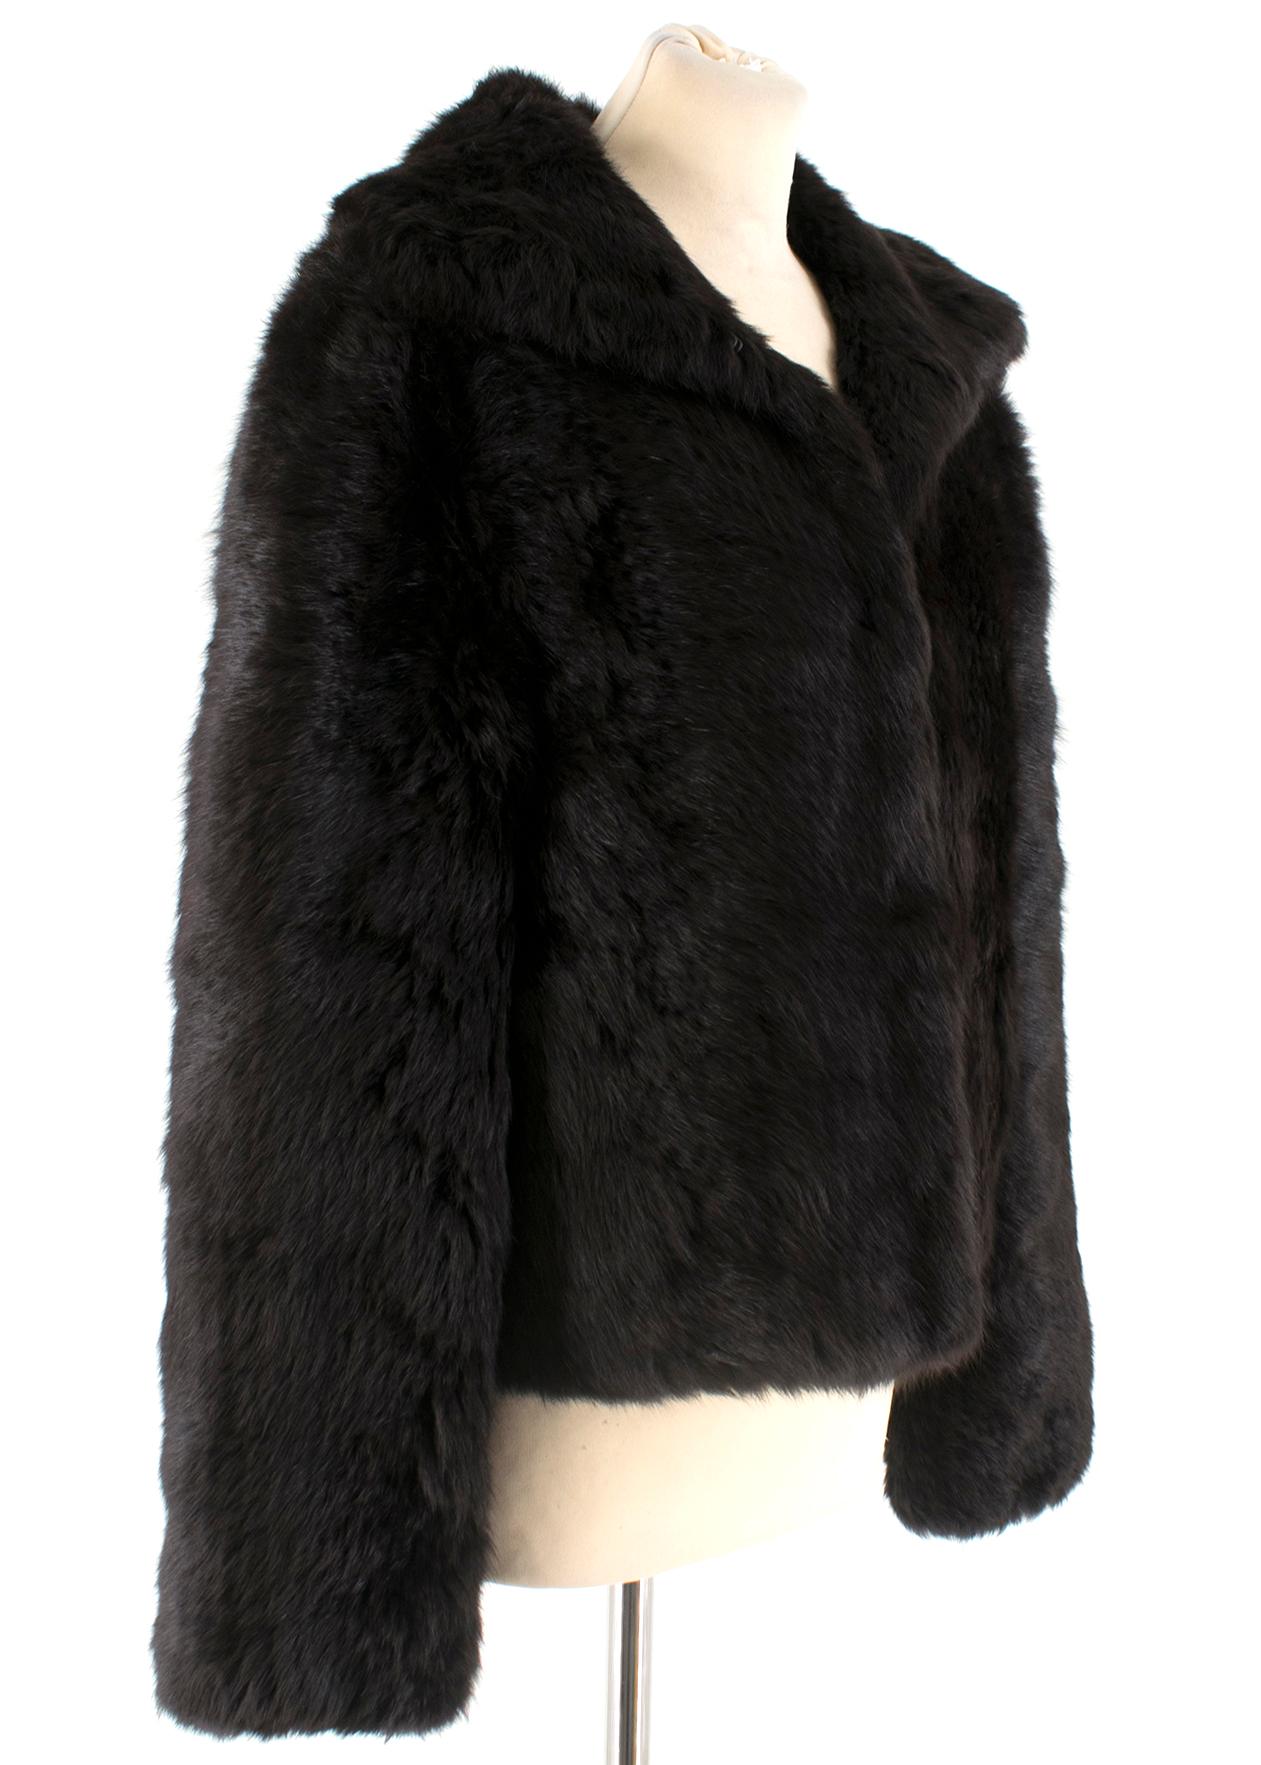 Fendi Lightweight Black Rabbit Fur Jacket 

- unlined and lightweight
- Hologram label
- Two pockets
- no label but believed to be rabbit fur

Please note, these items are pre-owned and may show signs of being stored even when unworn and unused.